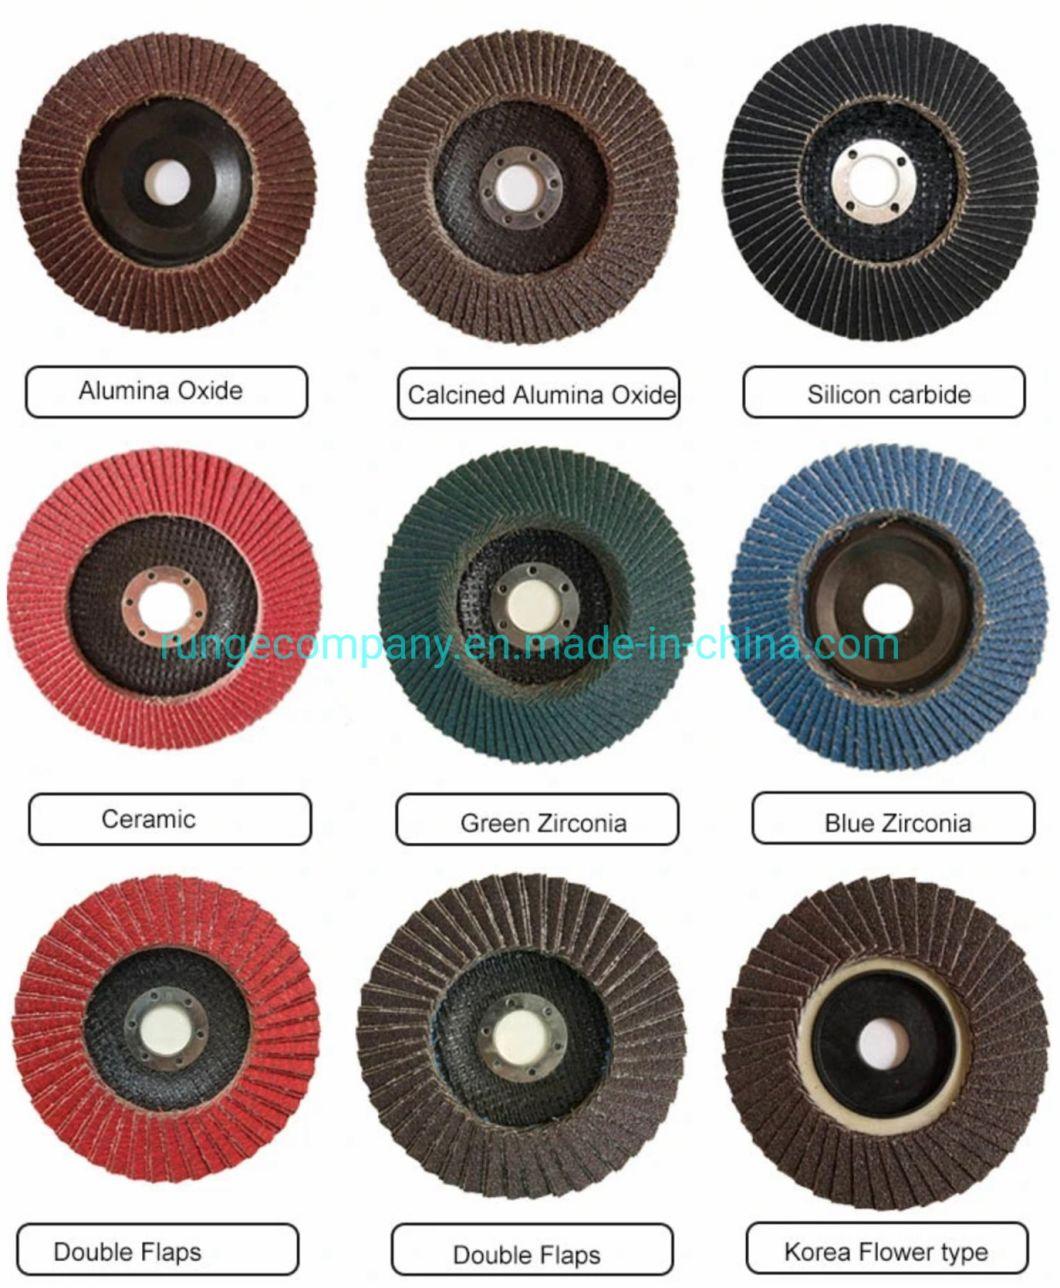 Power Electric Tools Accessories 14" X 3/32" Aluminum Oxide Grain Cutting Disc for Ferrous Metals, Including Stainless Steel